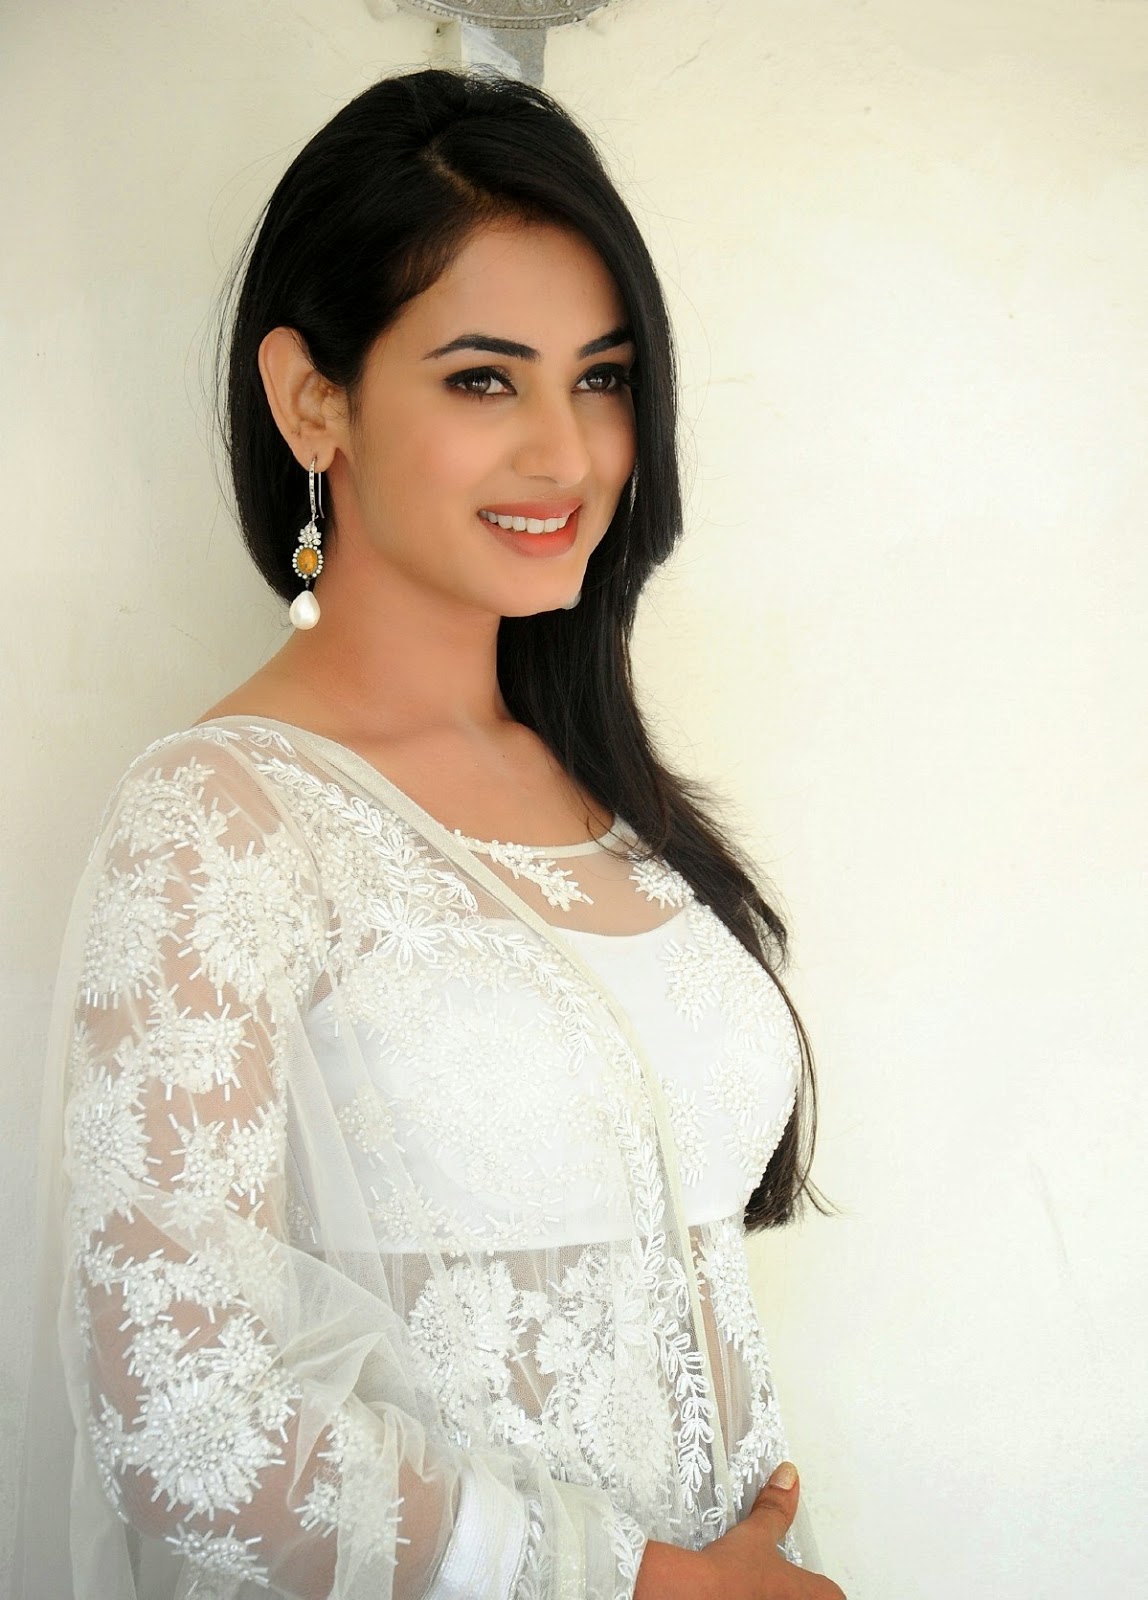 High Quality Bollywood Celebrity Pictures Sonal Chauhan Looks Gorgeous In White Dress At Telugu